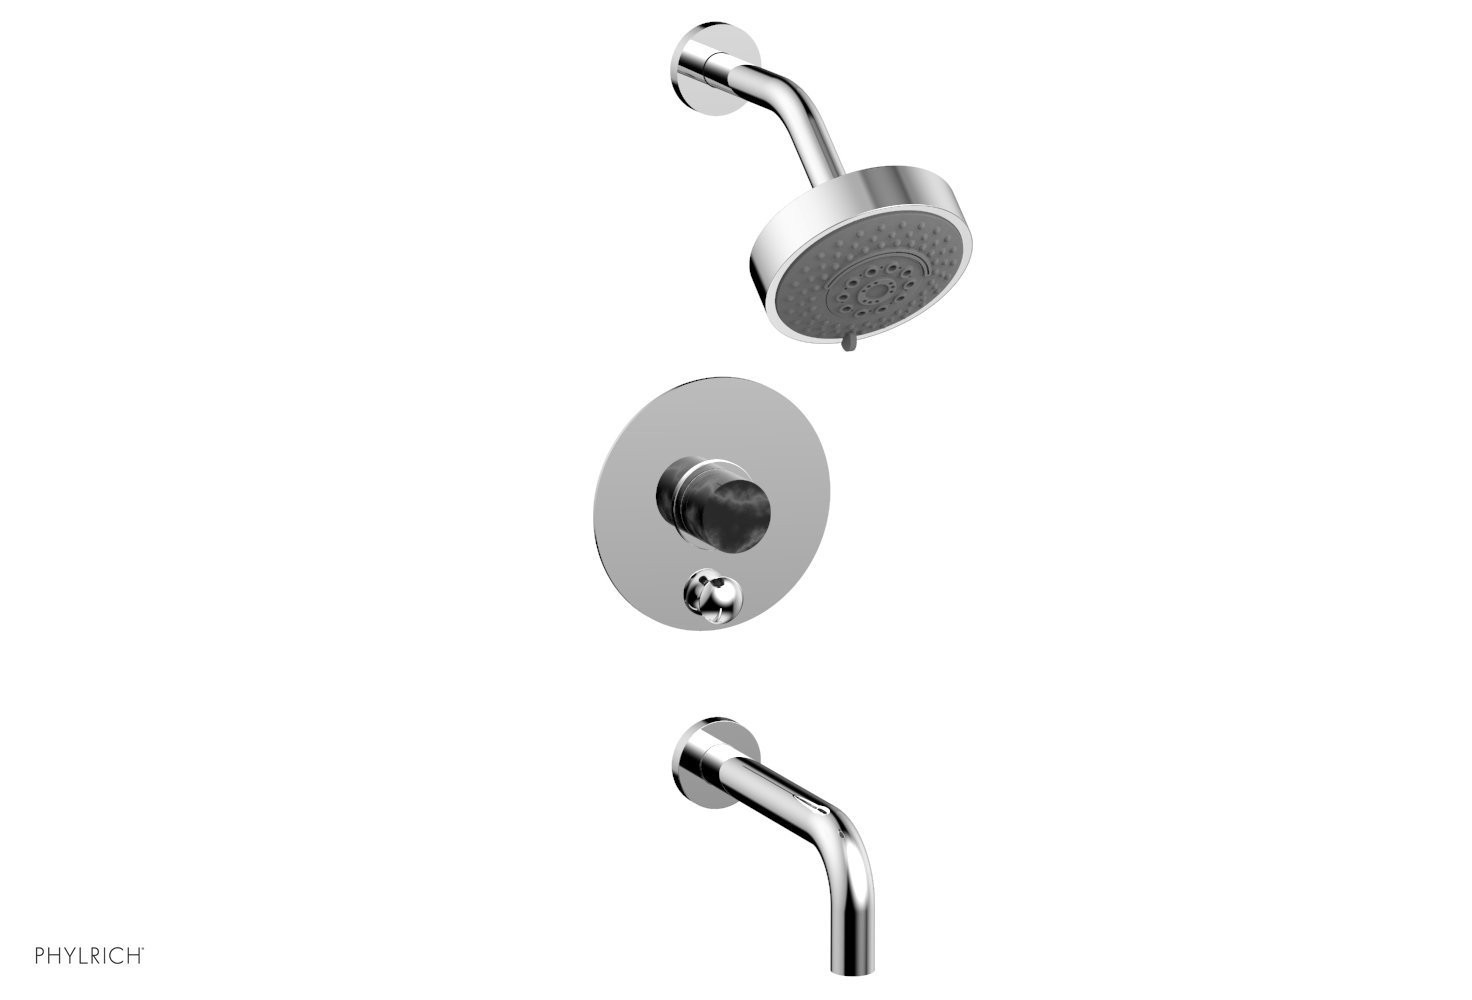 PHYLRICH 230-28-032 BASIC II WALL MOUNT PRESSURE BALANCE TUB AND SHOWER SET WITH SOAP STONE KNOB HANDLE